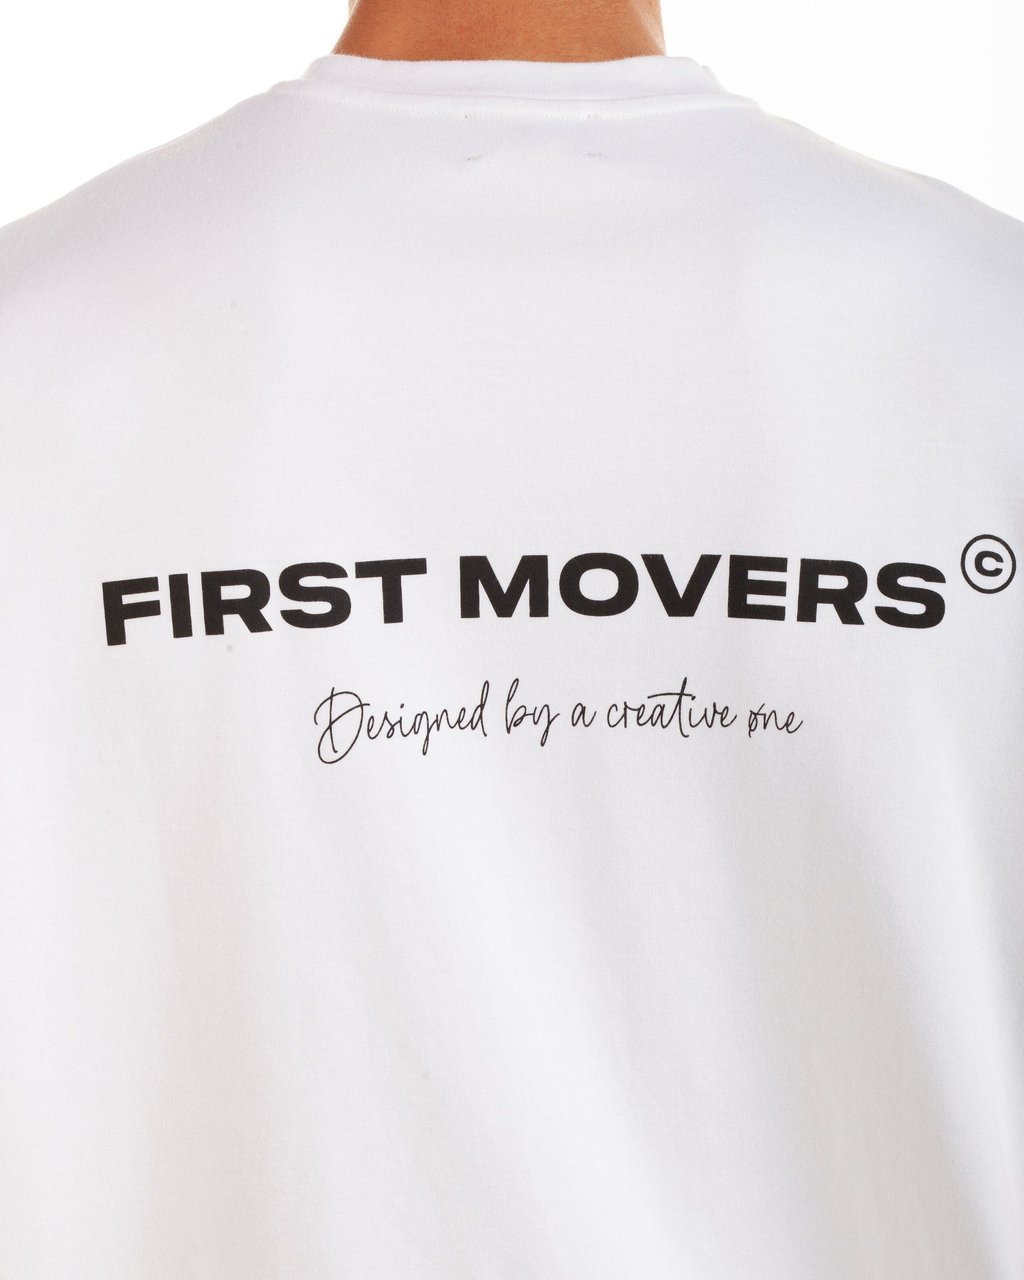 Øne First Movers T-shirt Creative Øne White/Black Wit